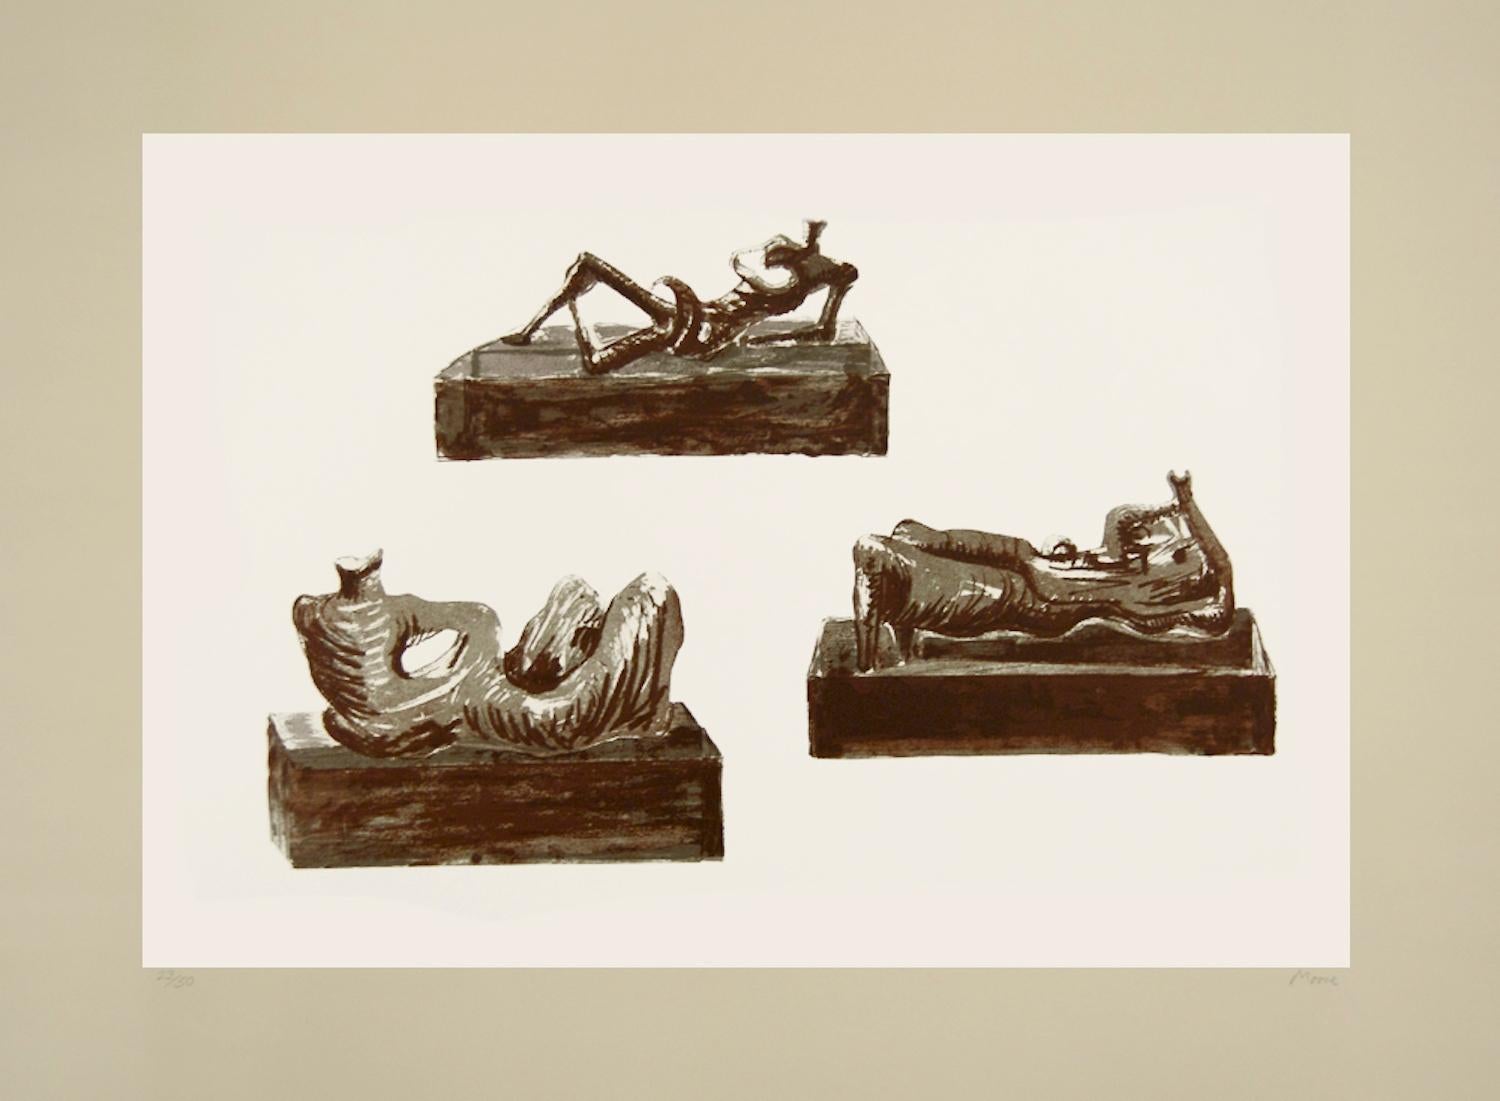 Three Reclining Figures on Pedestals - Original Lithograph by Henry Moore - 1976